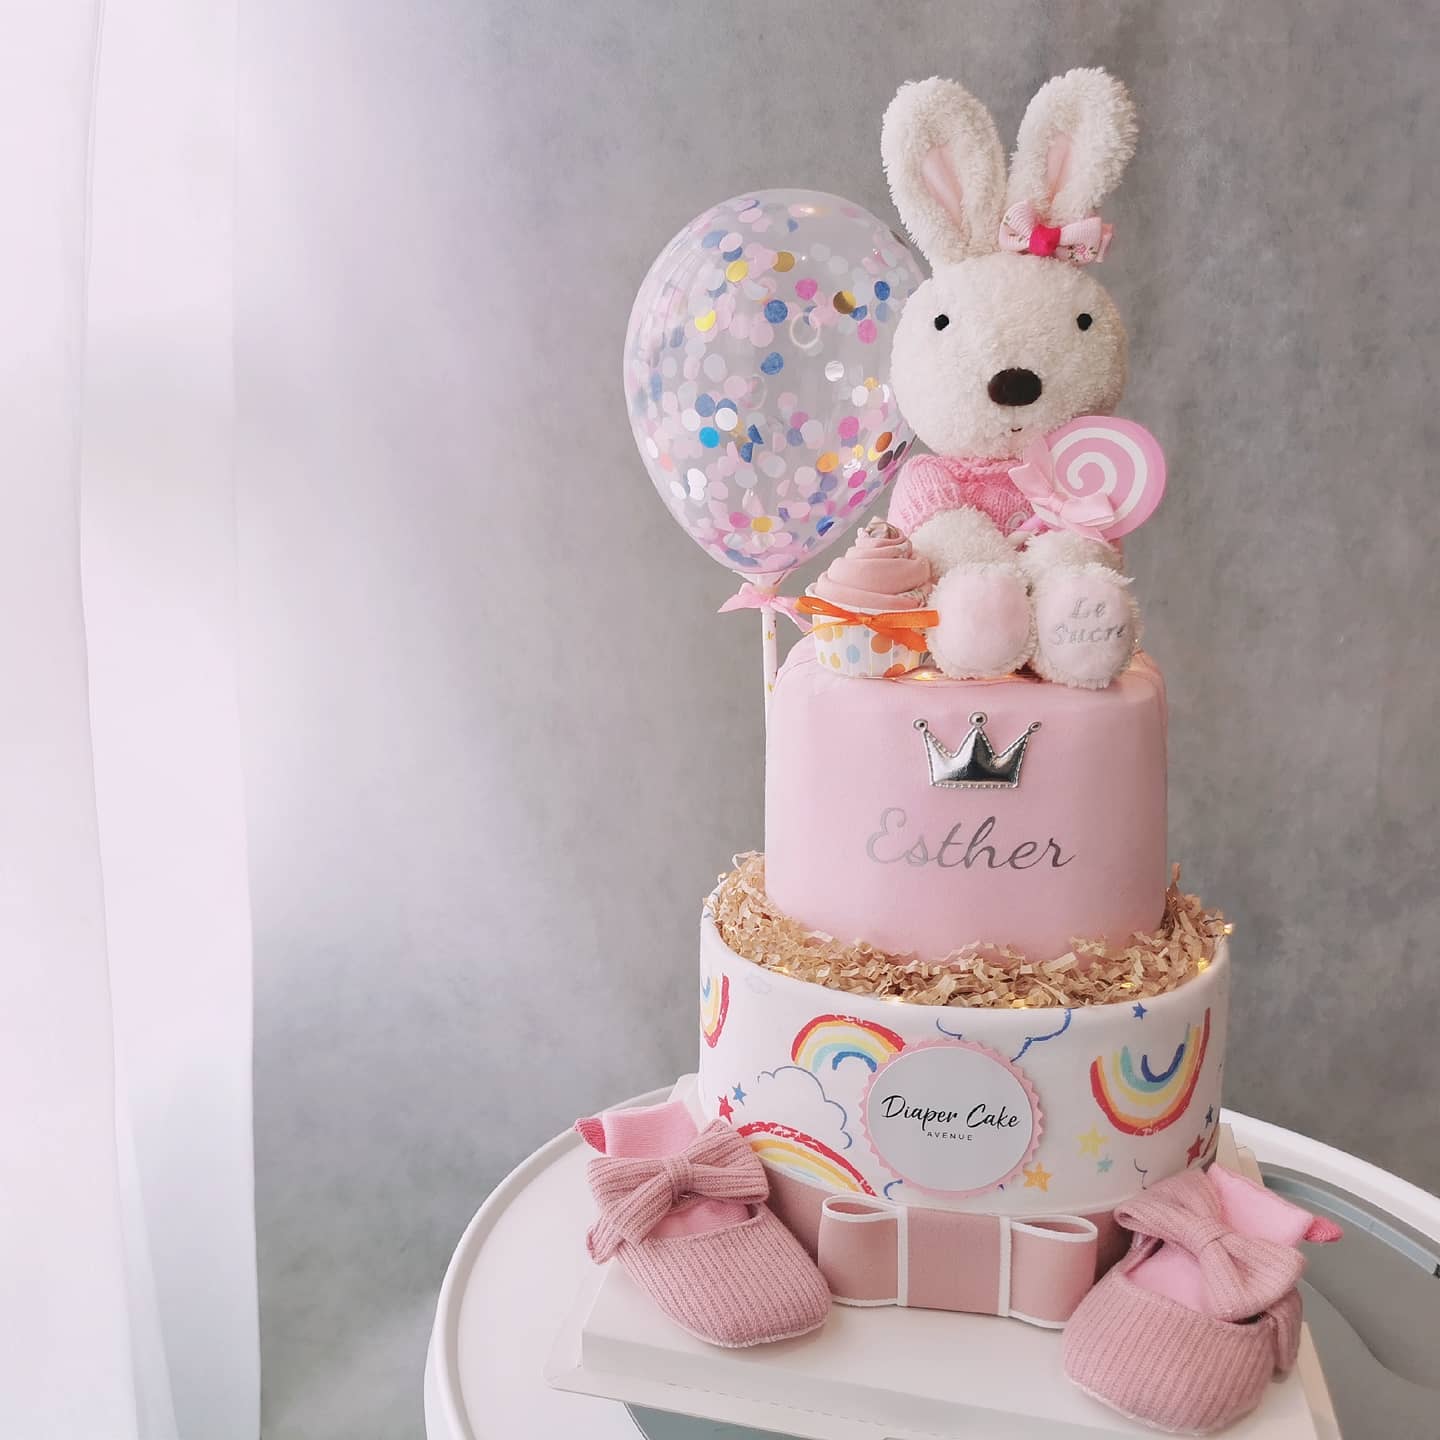 Customised baby gifts - Diaper Cake Avenue